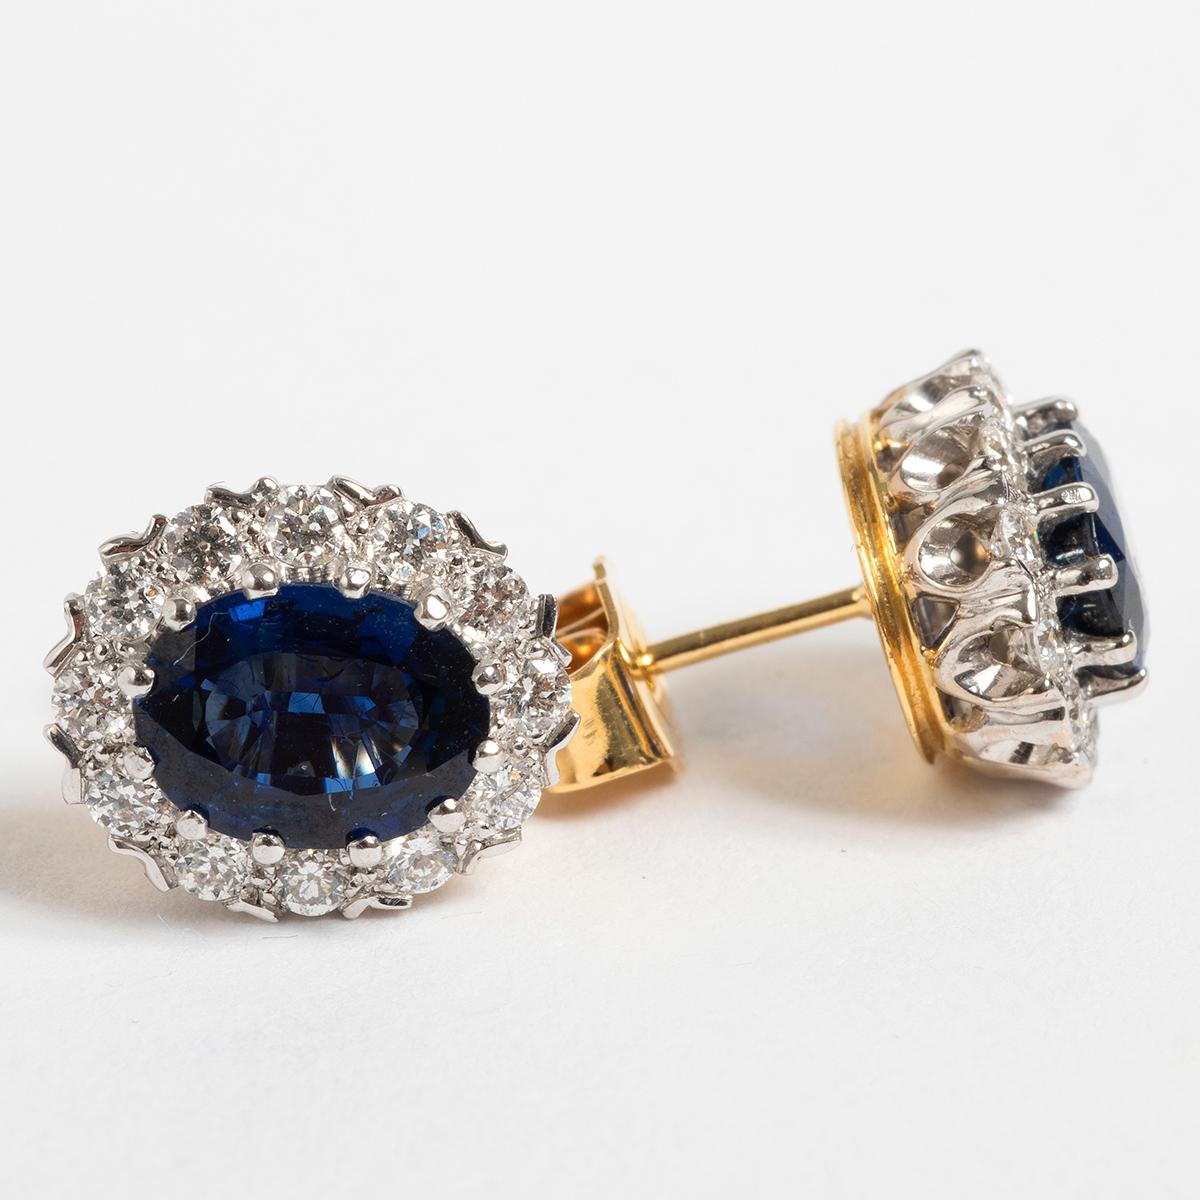 A unique piece within our carefully curated Vintage & Prestige fine jewellery collection, we are delighted to present the following:

These elegant 18ct Diana style earrings weigh approx 2.63ct in sapphire and 0.59ct in diamonds. Measuring 10mm x